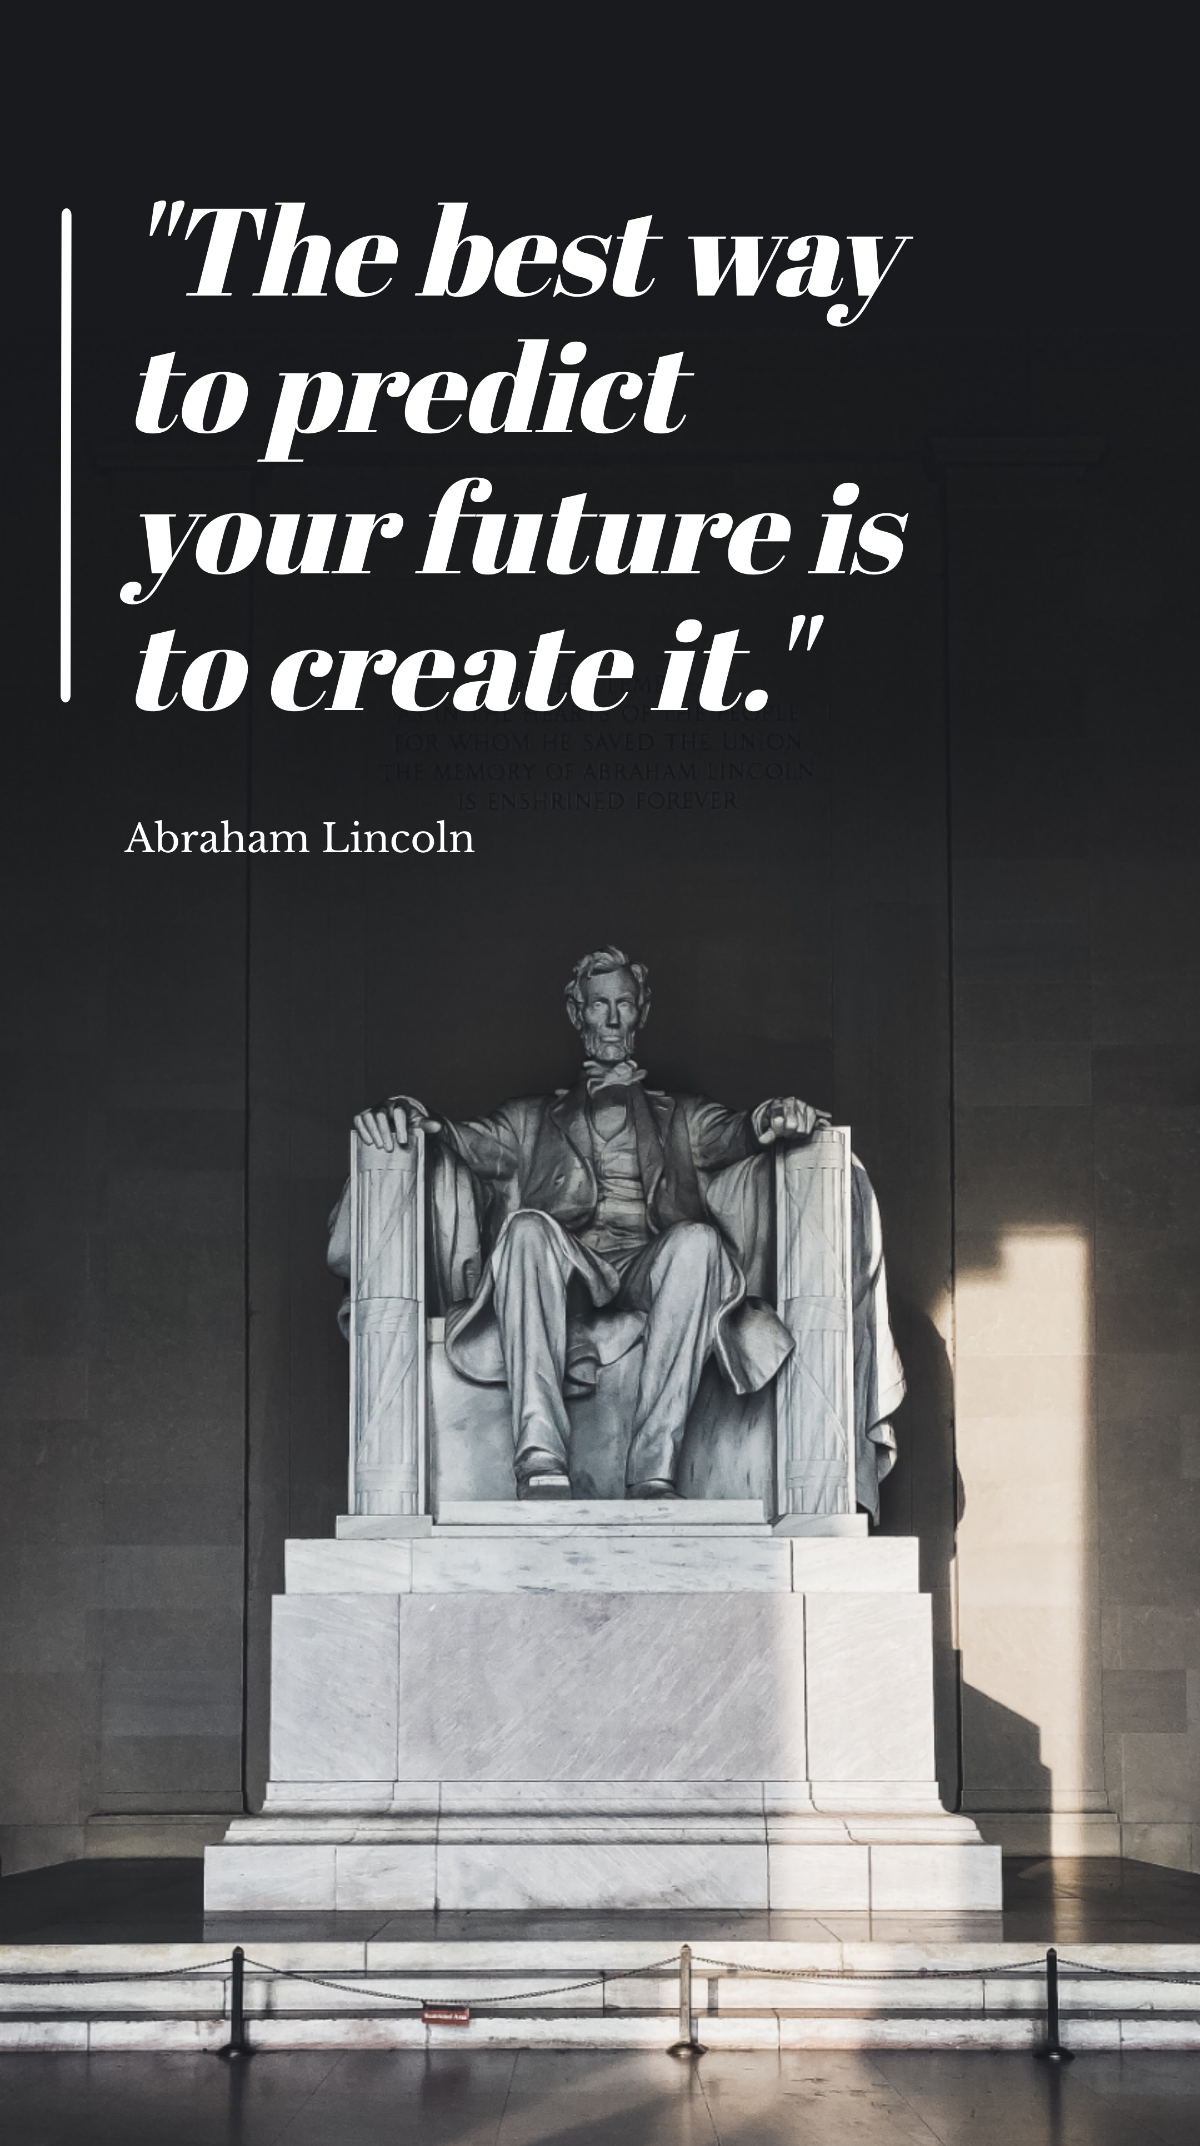 Abraham Lincoln - The best way to predict your future is to create it Template